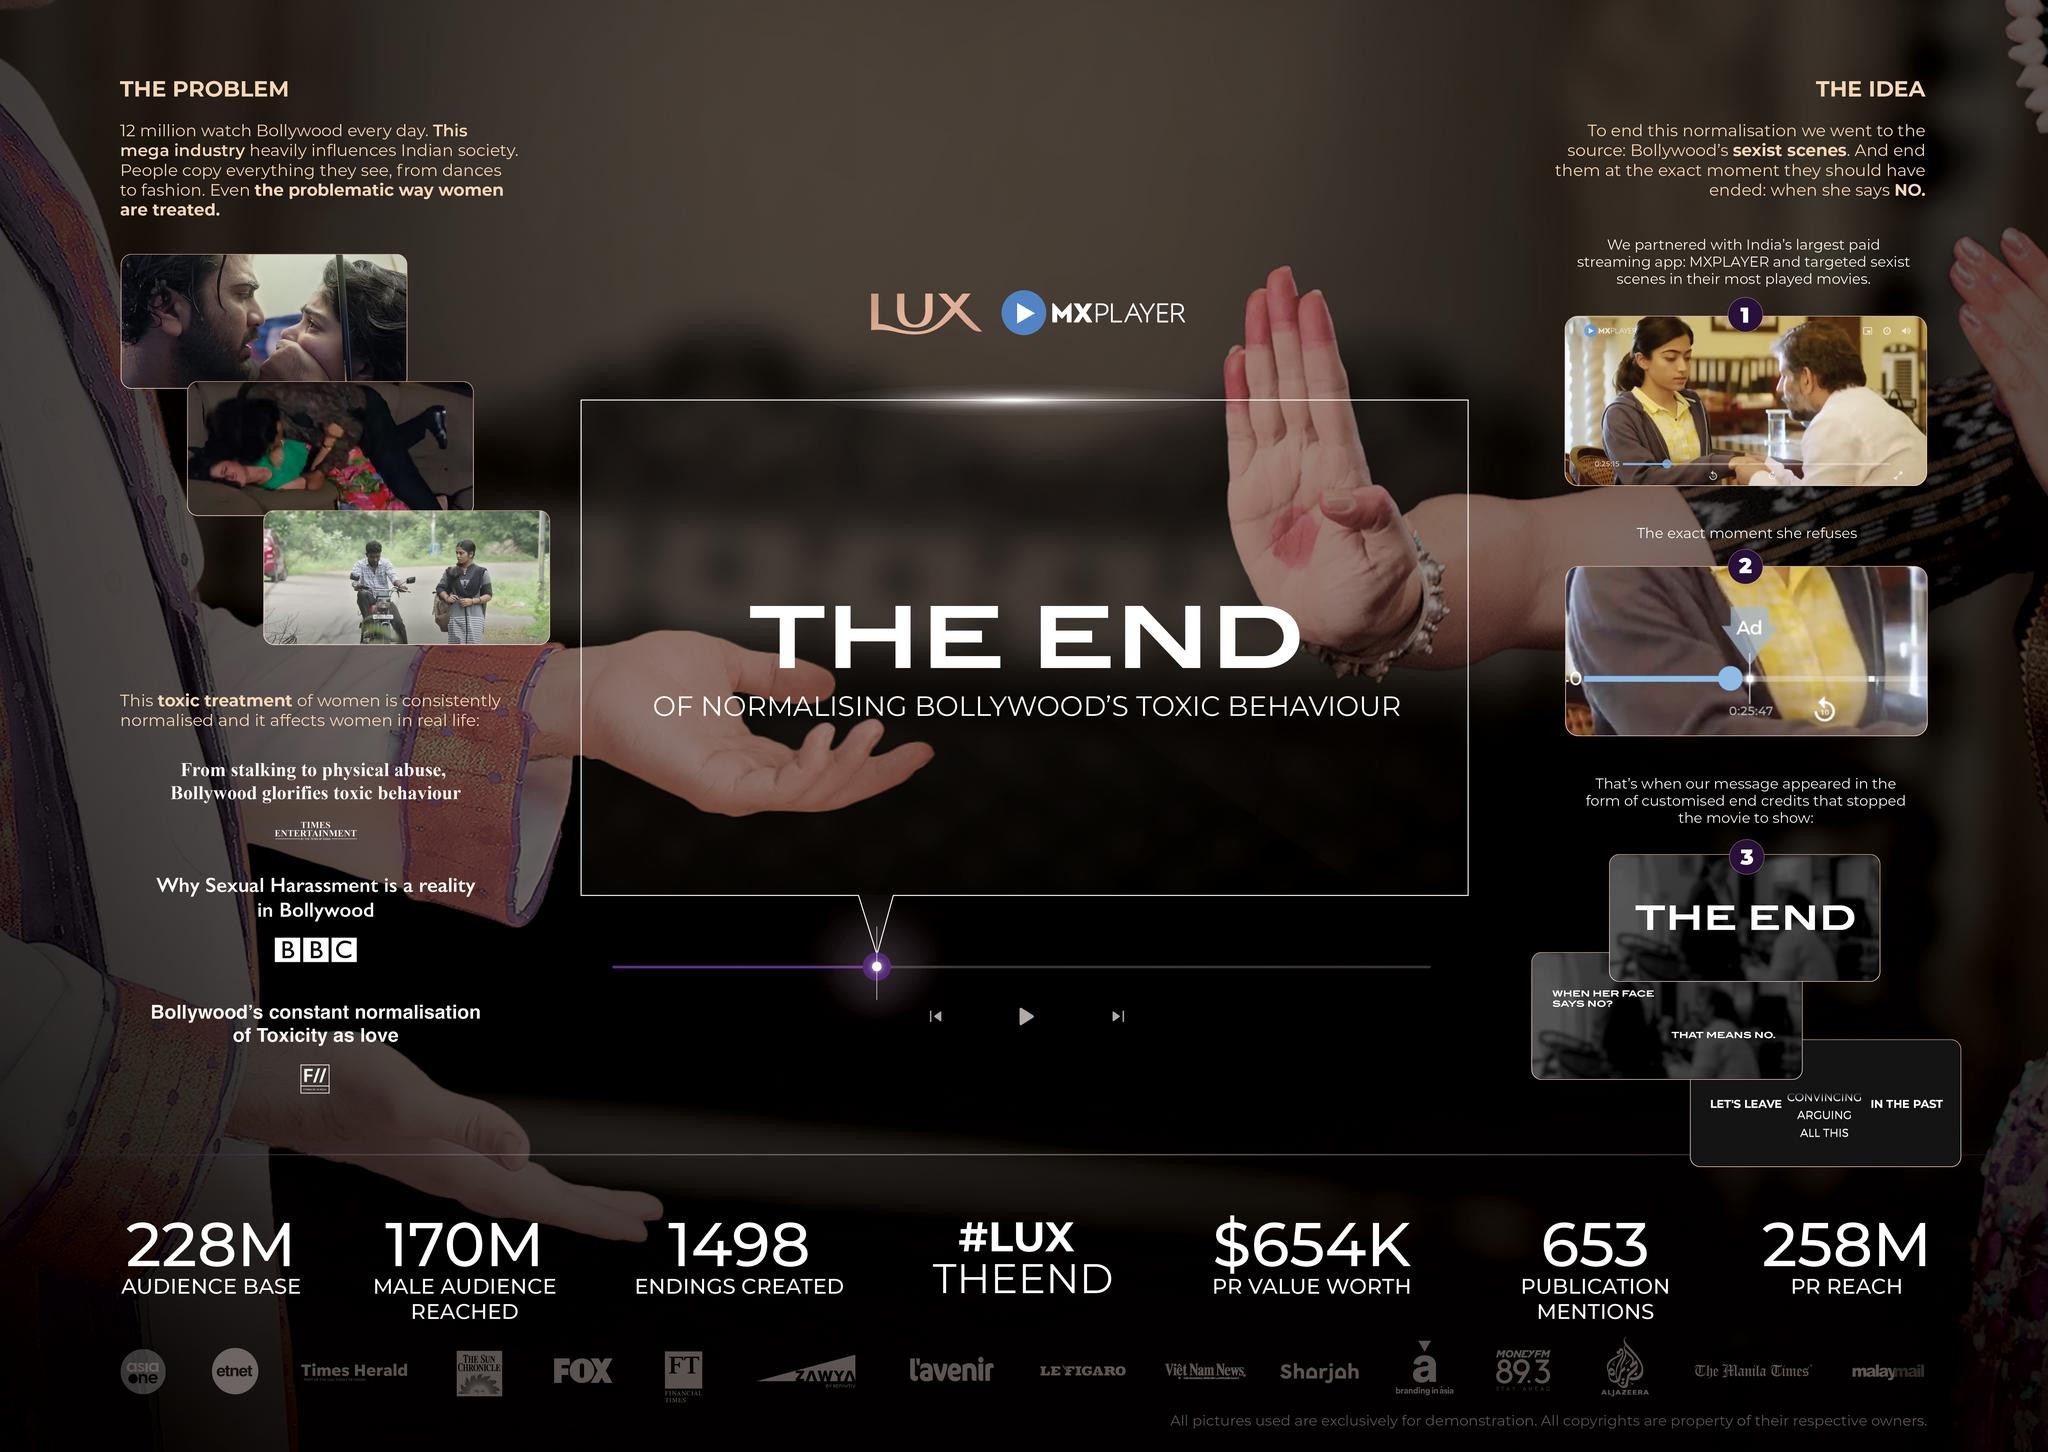 LUX "THE END"